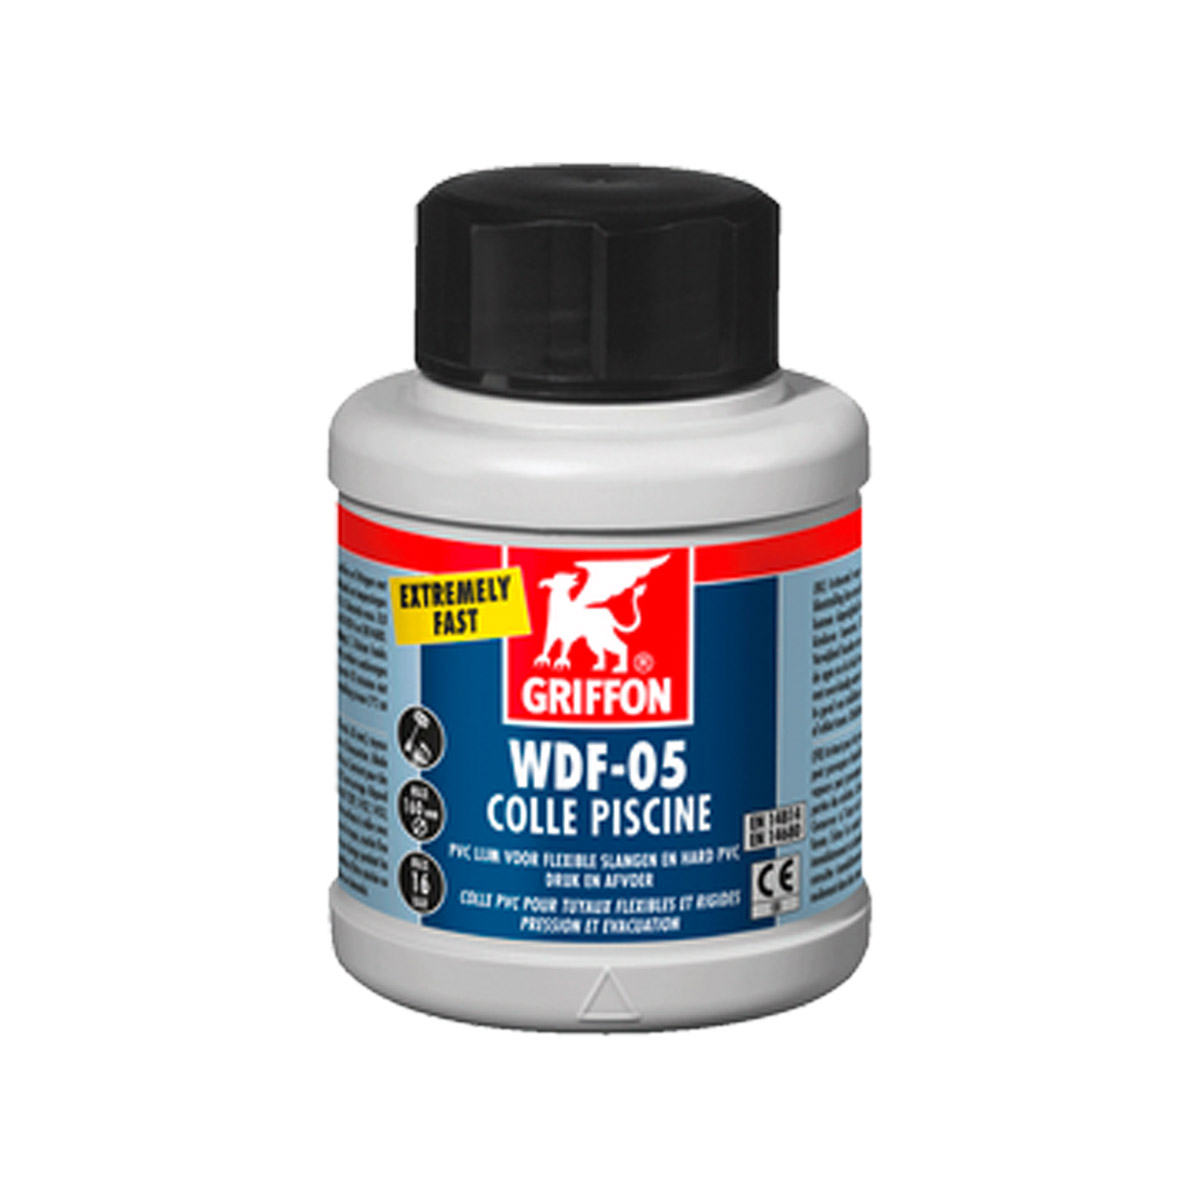 Solvent Cement GRIFFON WDF-05
125ml with brush Solvent Cement GRIFFON WDF-05
125ml with brush